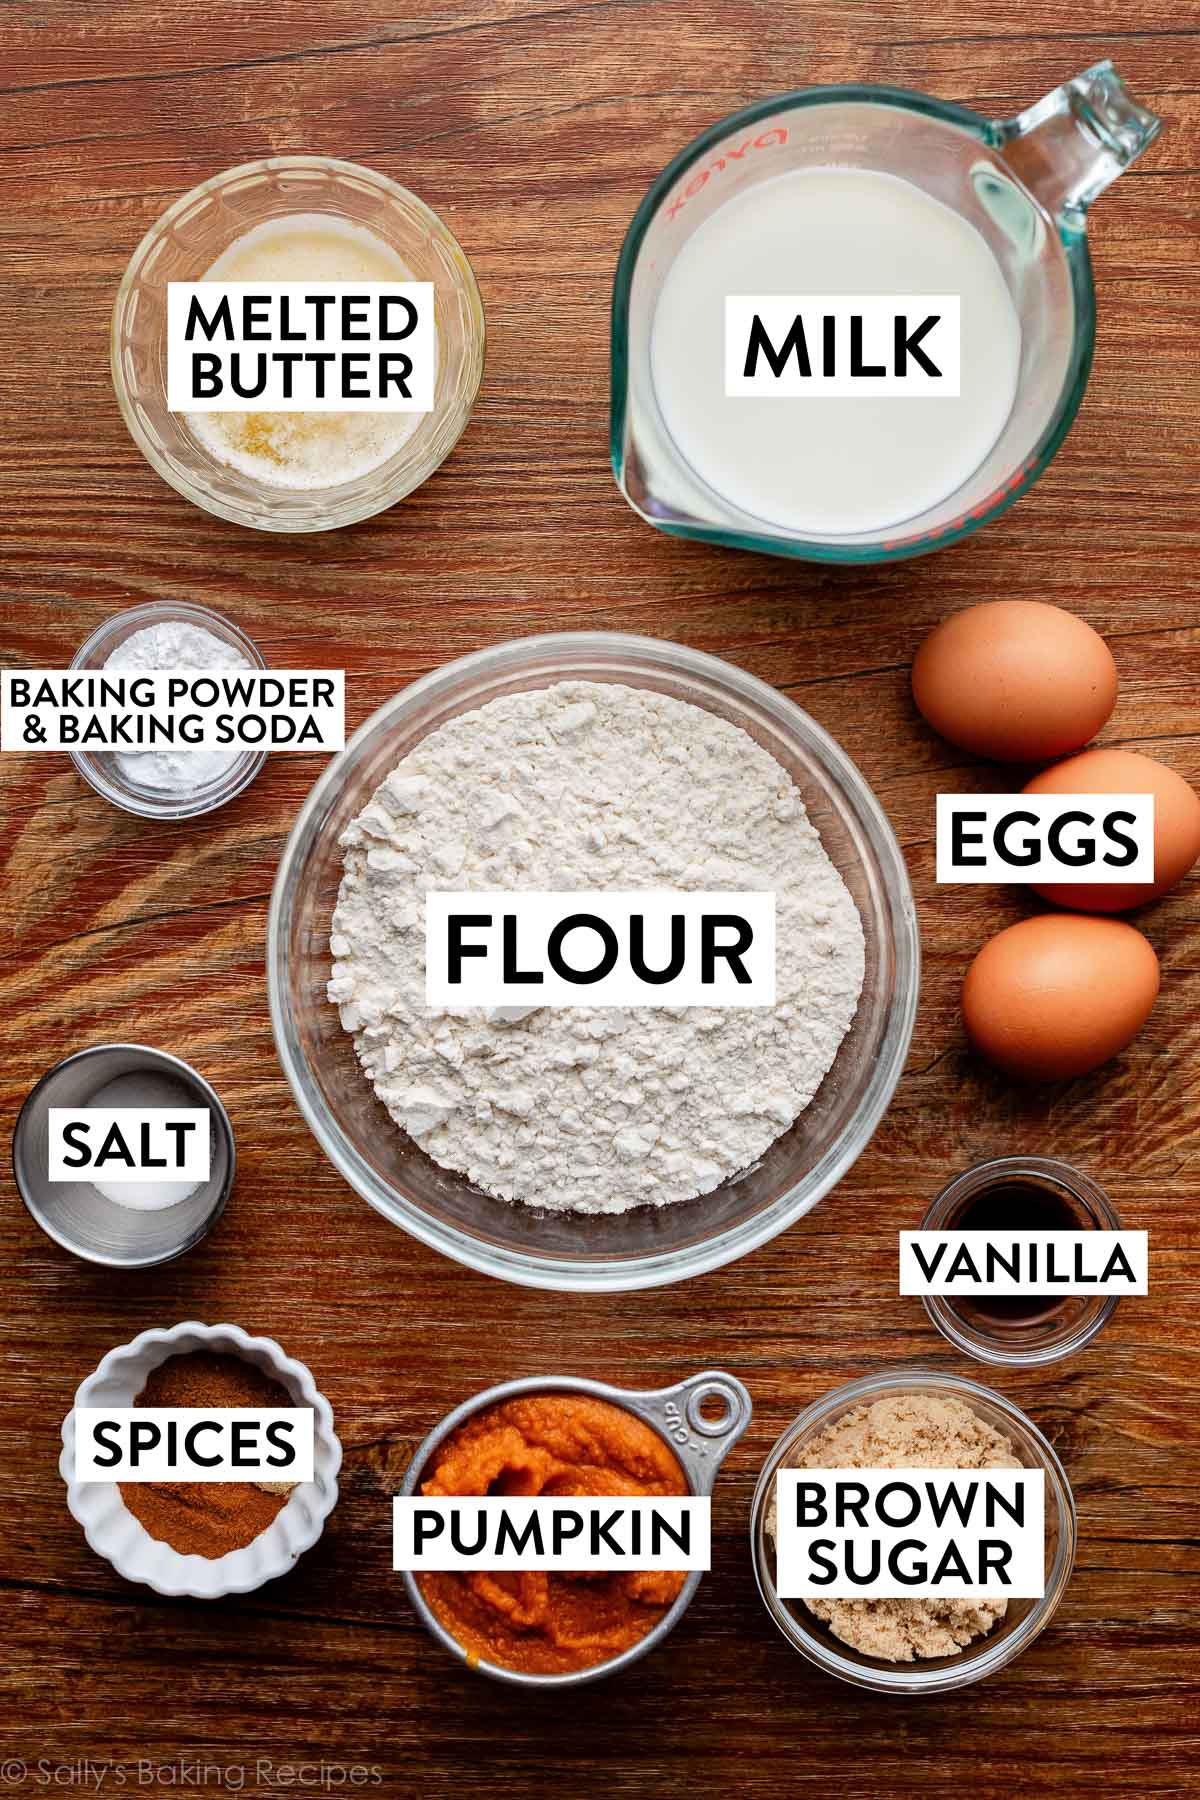 ingredients in bowls on wooden surface including flour, milk, melted butter, brown sugar, pumpkin, spices, vanilla, salt, and eggs.